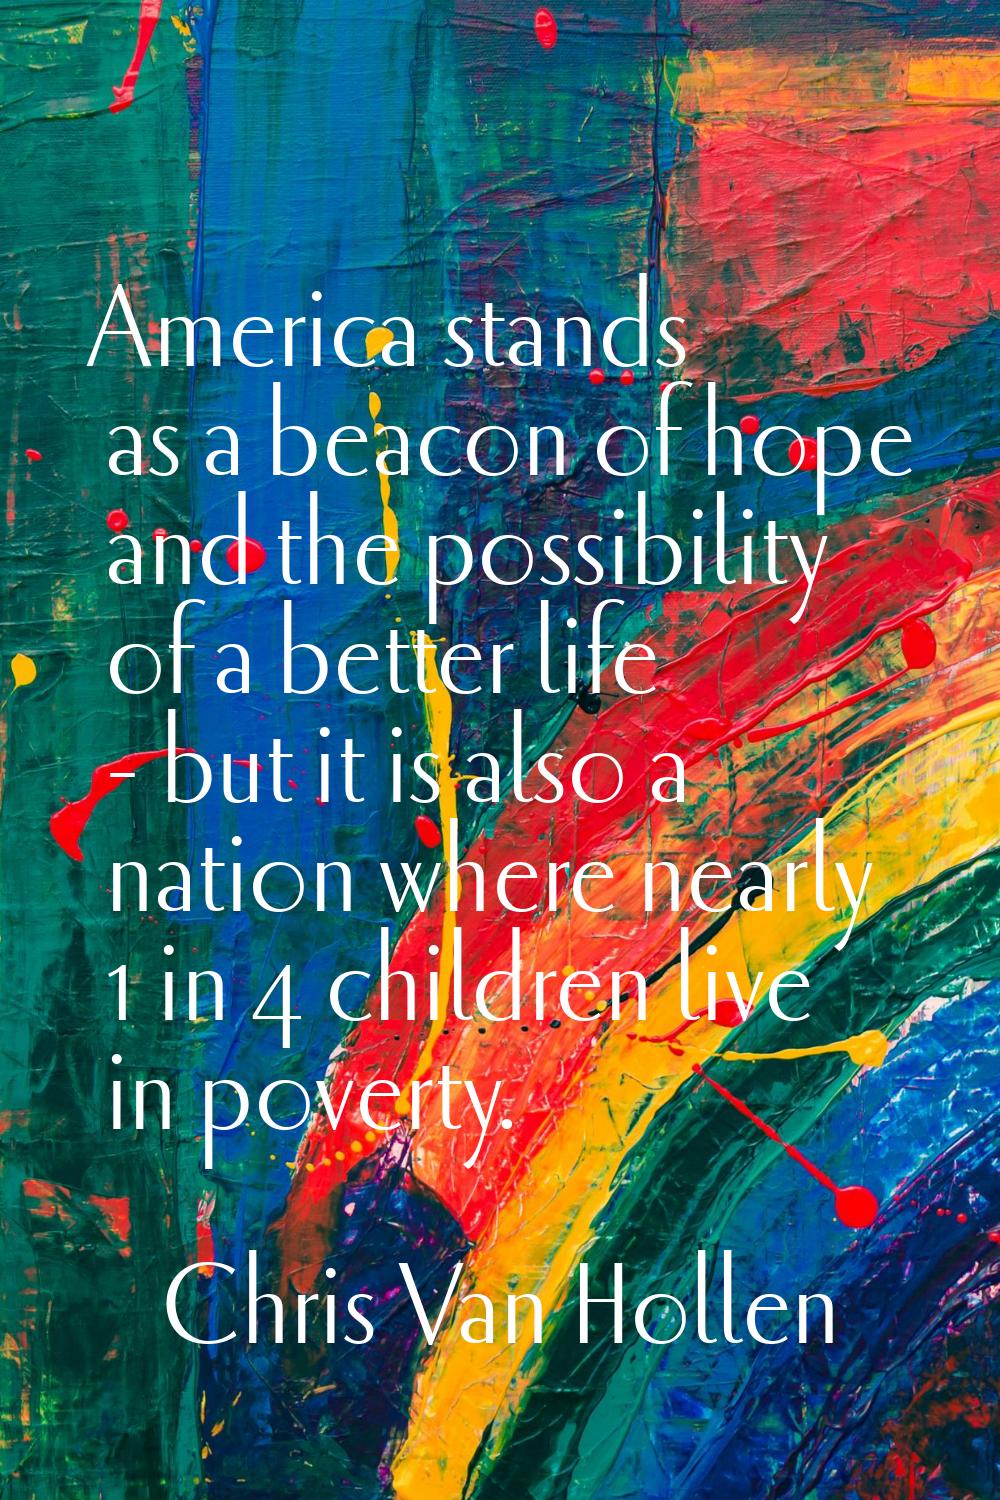 America stands as a beacon of hope and the possibility of a better life - but it is also a nation w